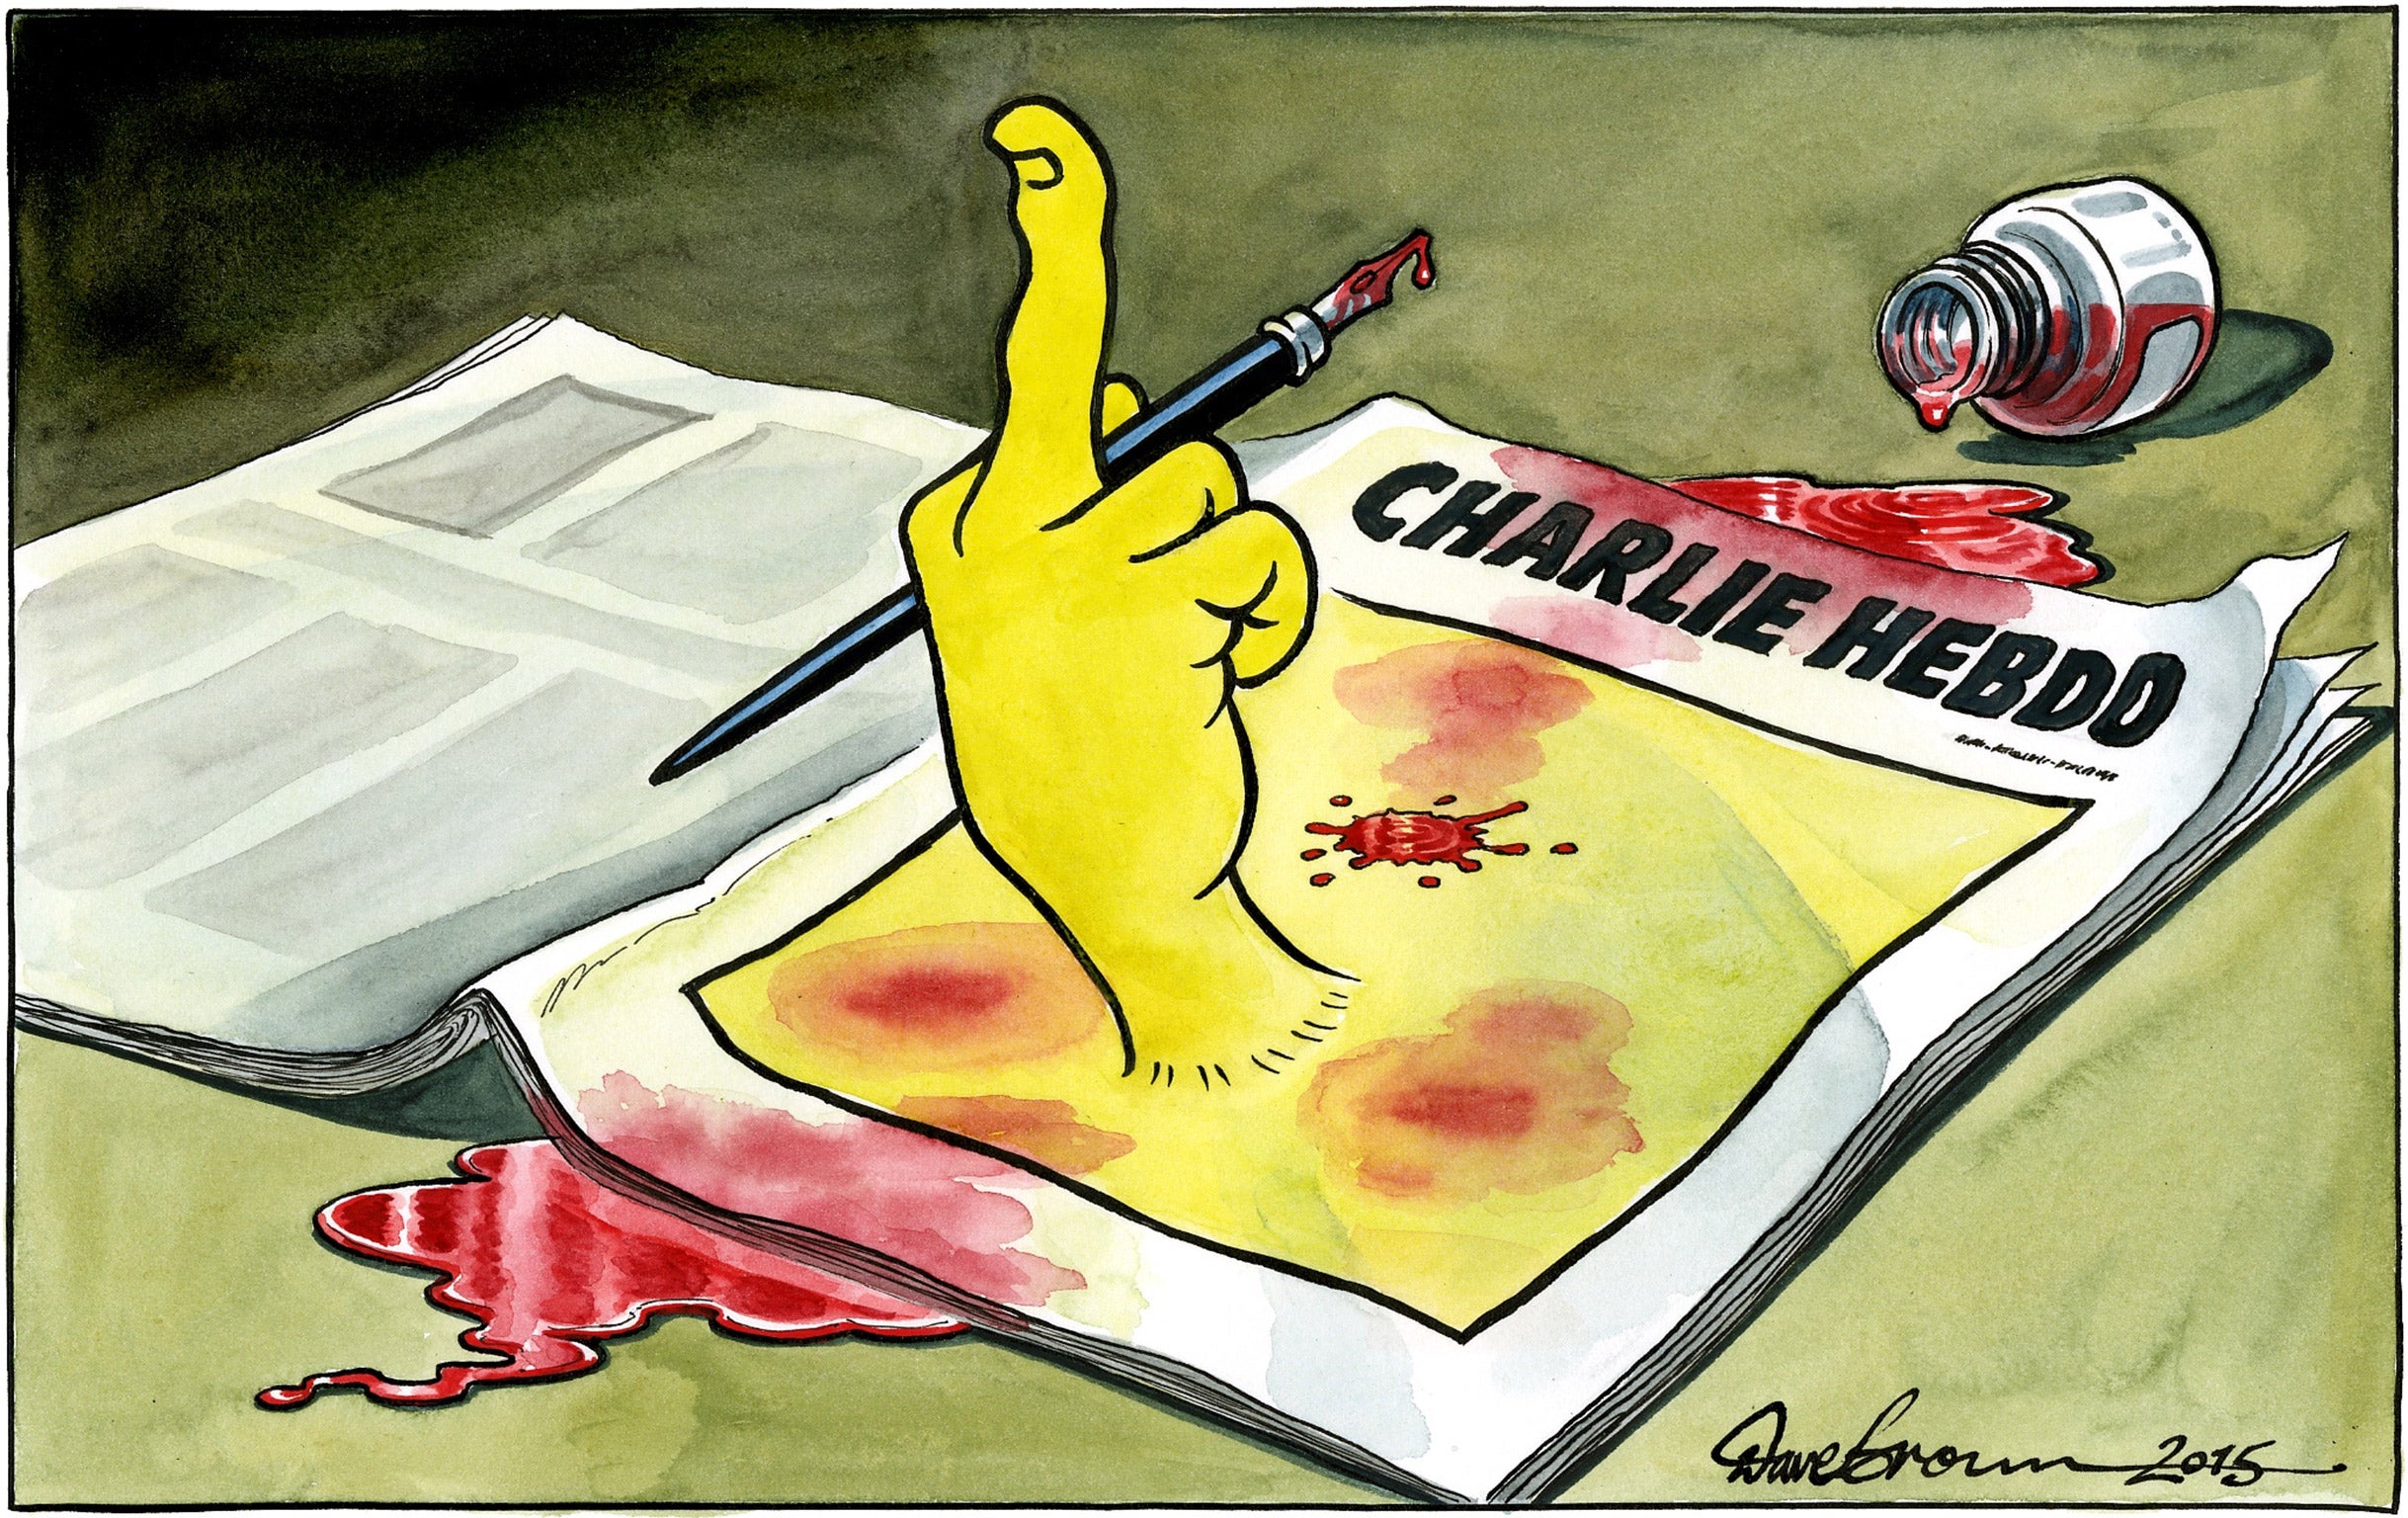 The cartoon produced by The Independent's Dave Brown following the Charlie Hebdo massacre